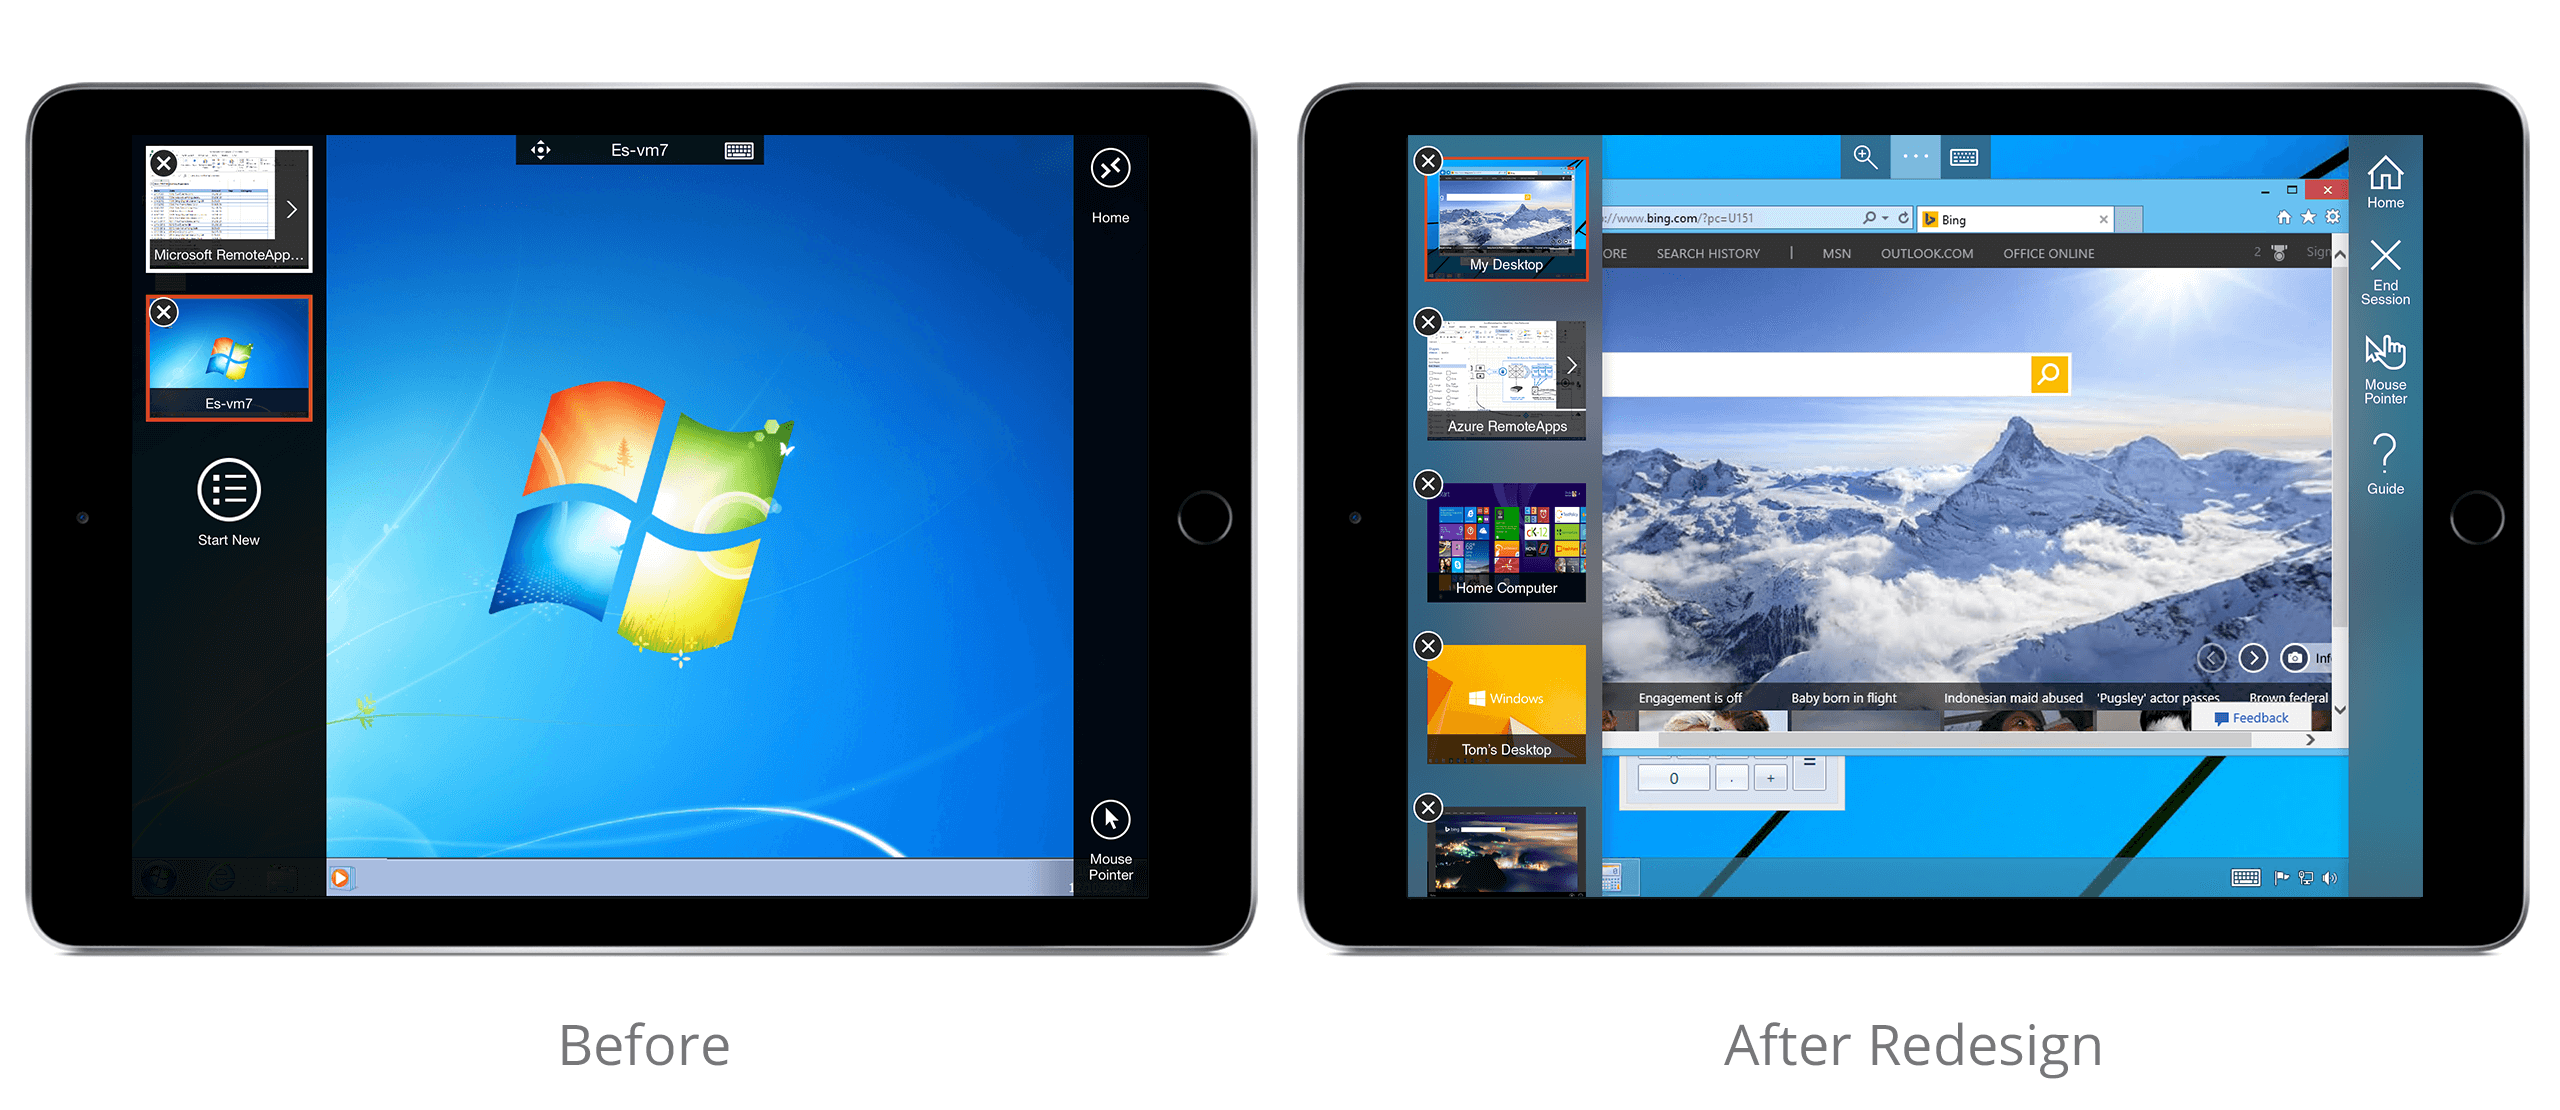 Side by side comparison of Remote Desktop iPad app before and after redesign. Shows the in-session experience when a user is connected to a PC from their iPad.